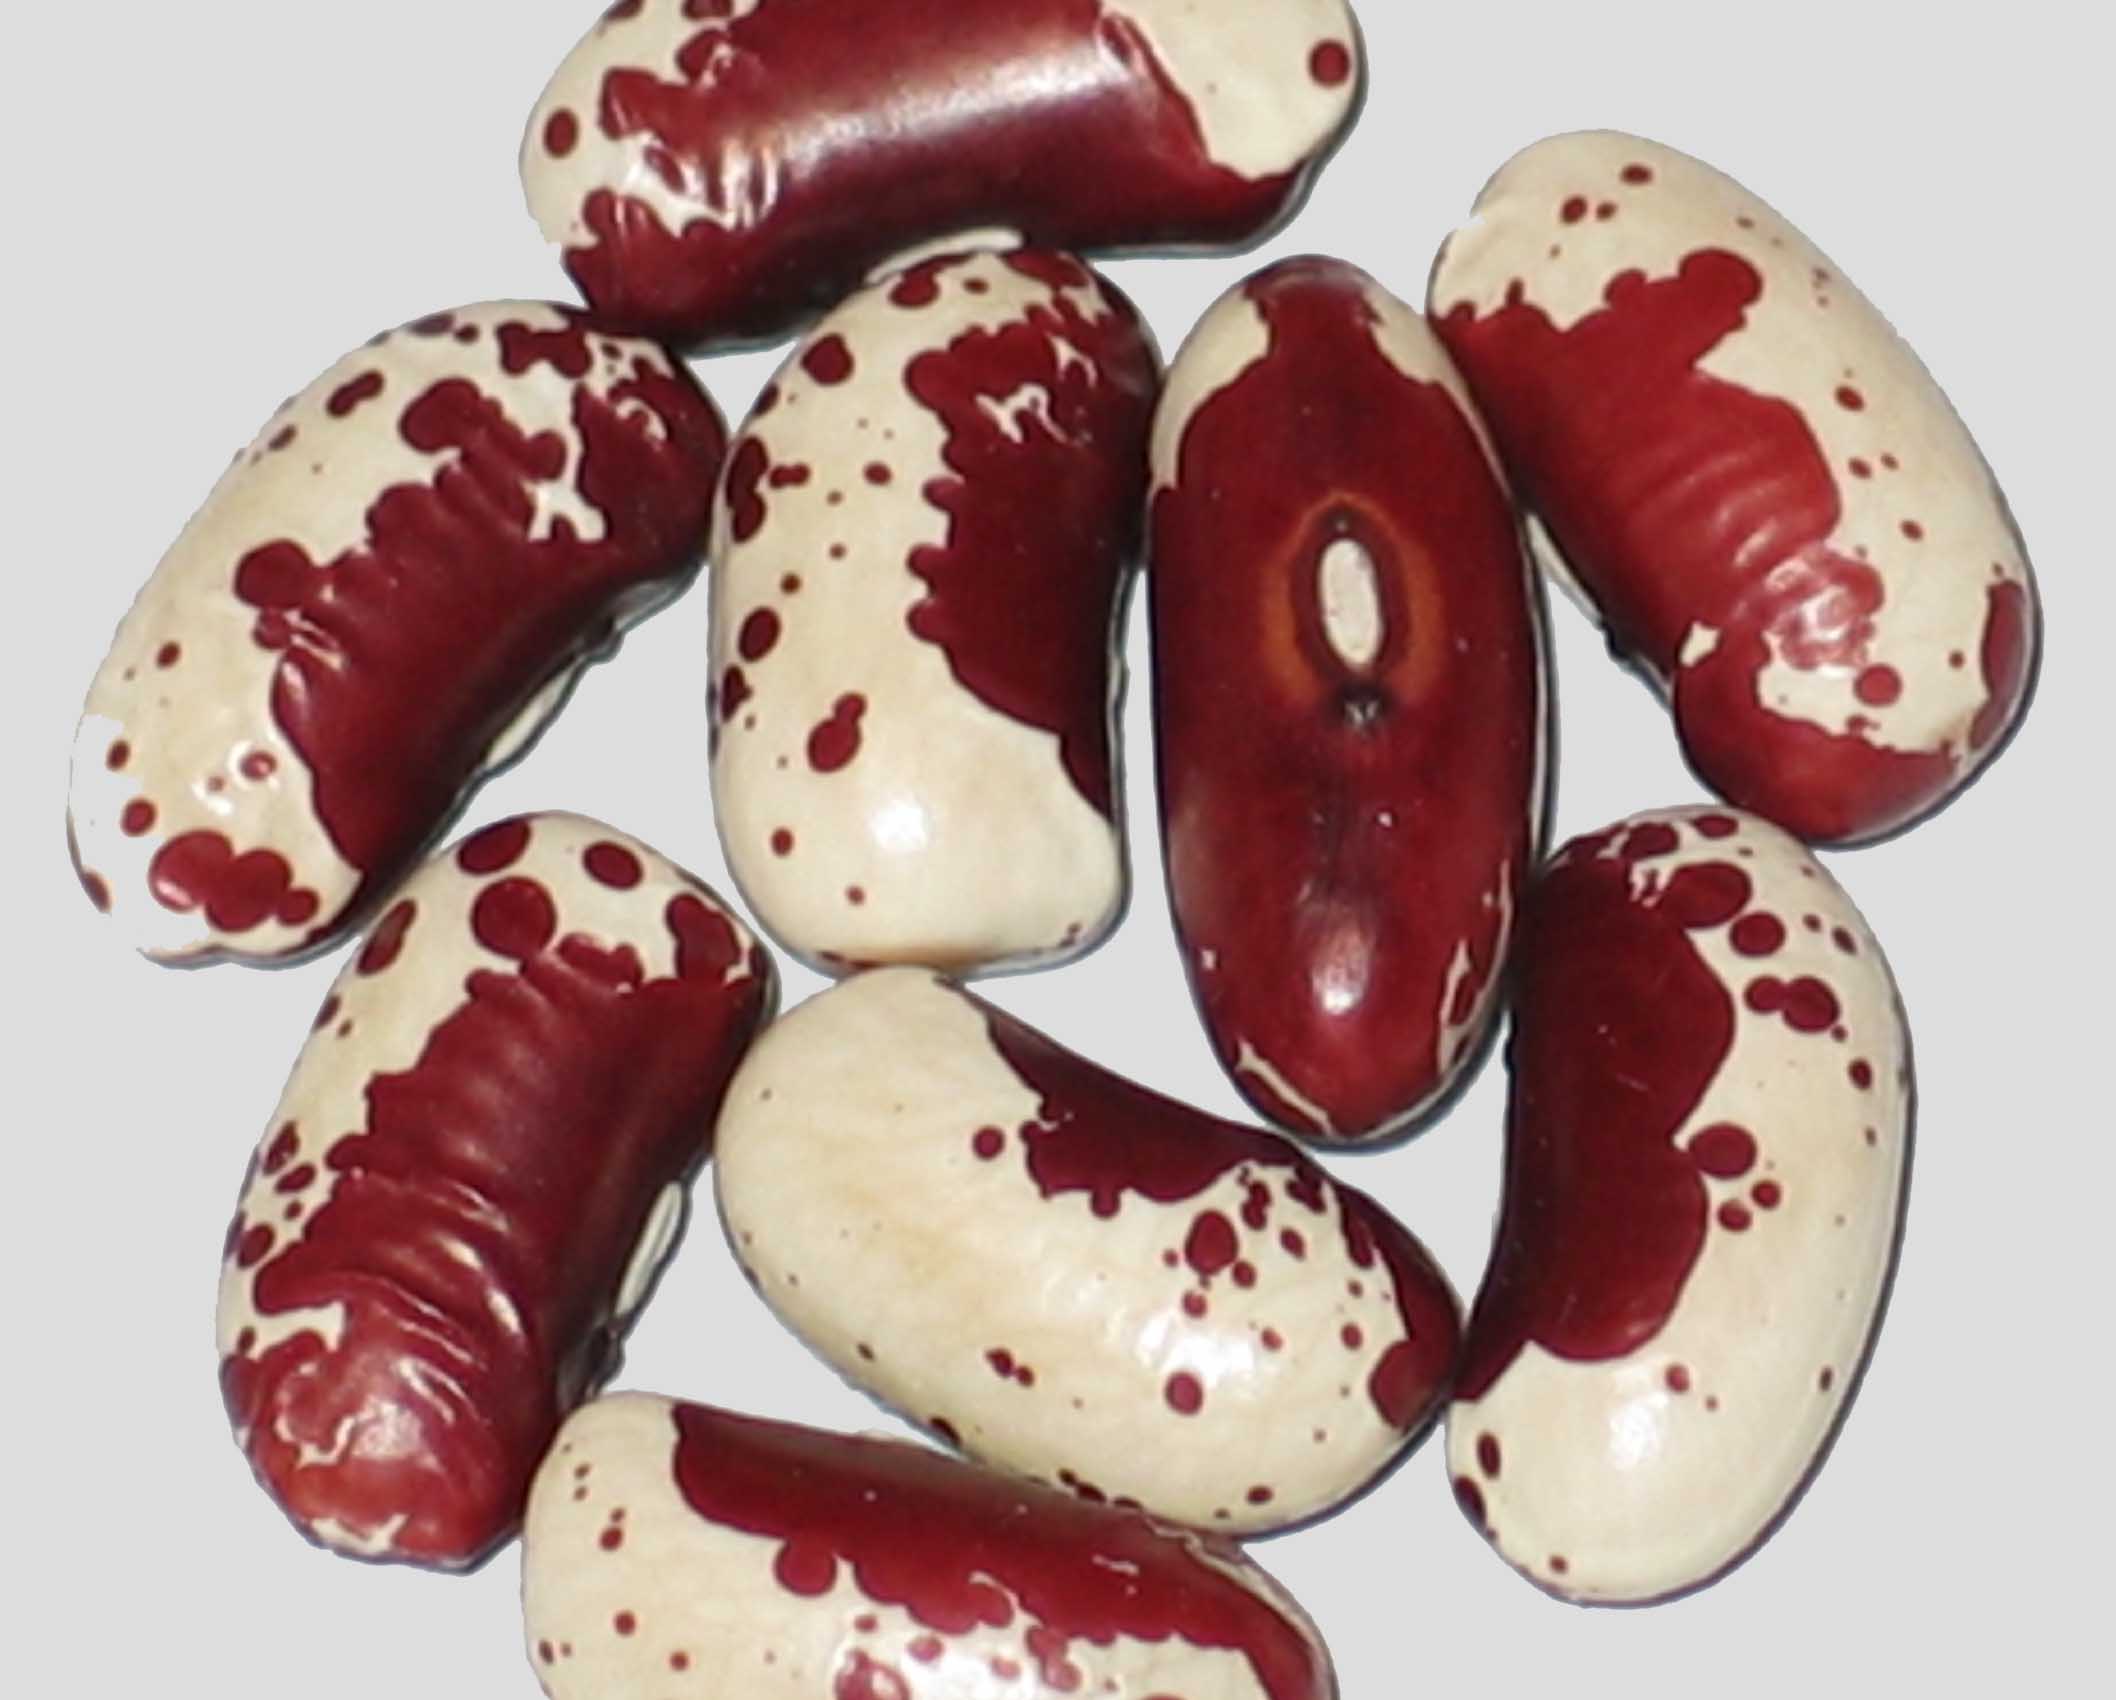 image of Jacobs Cattle Gasless beans